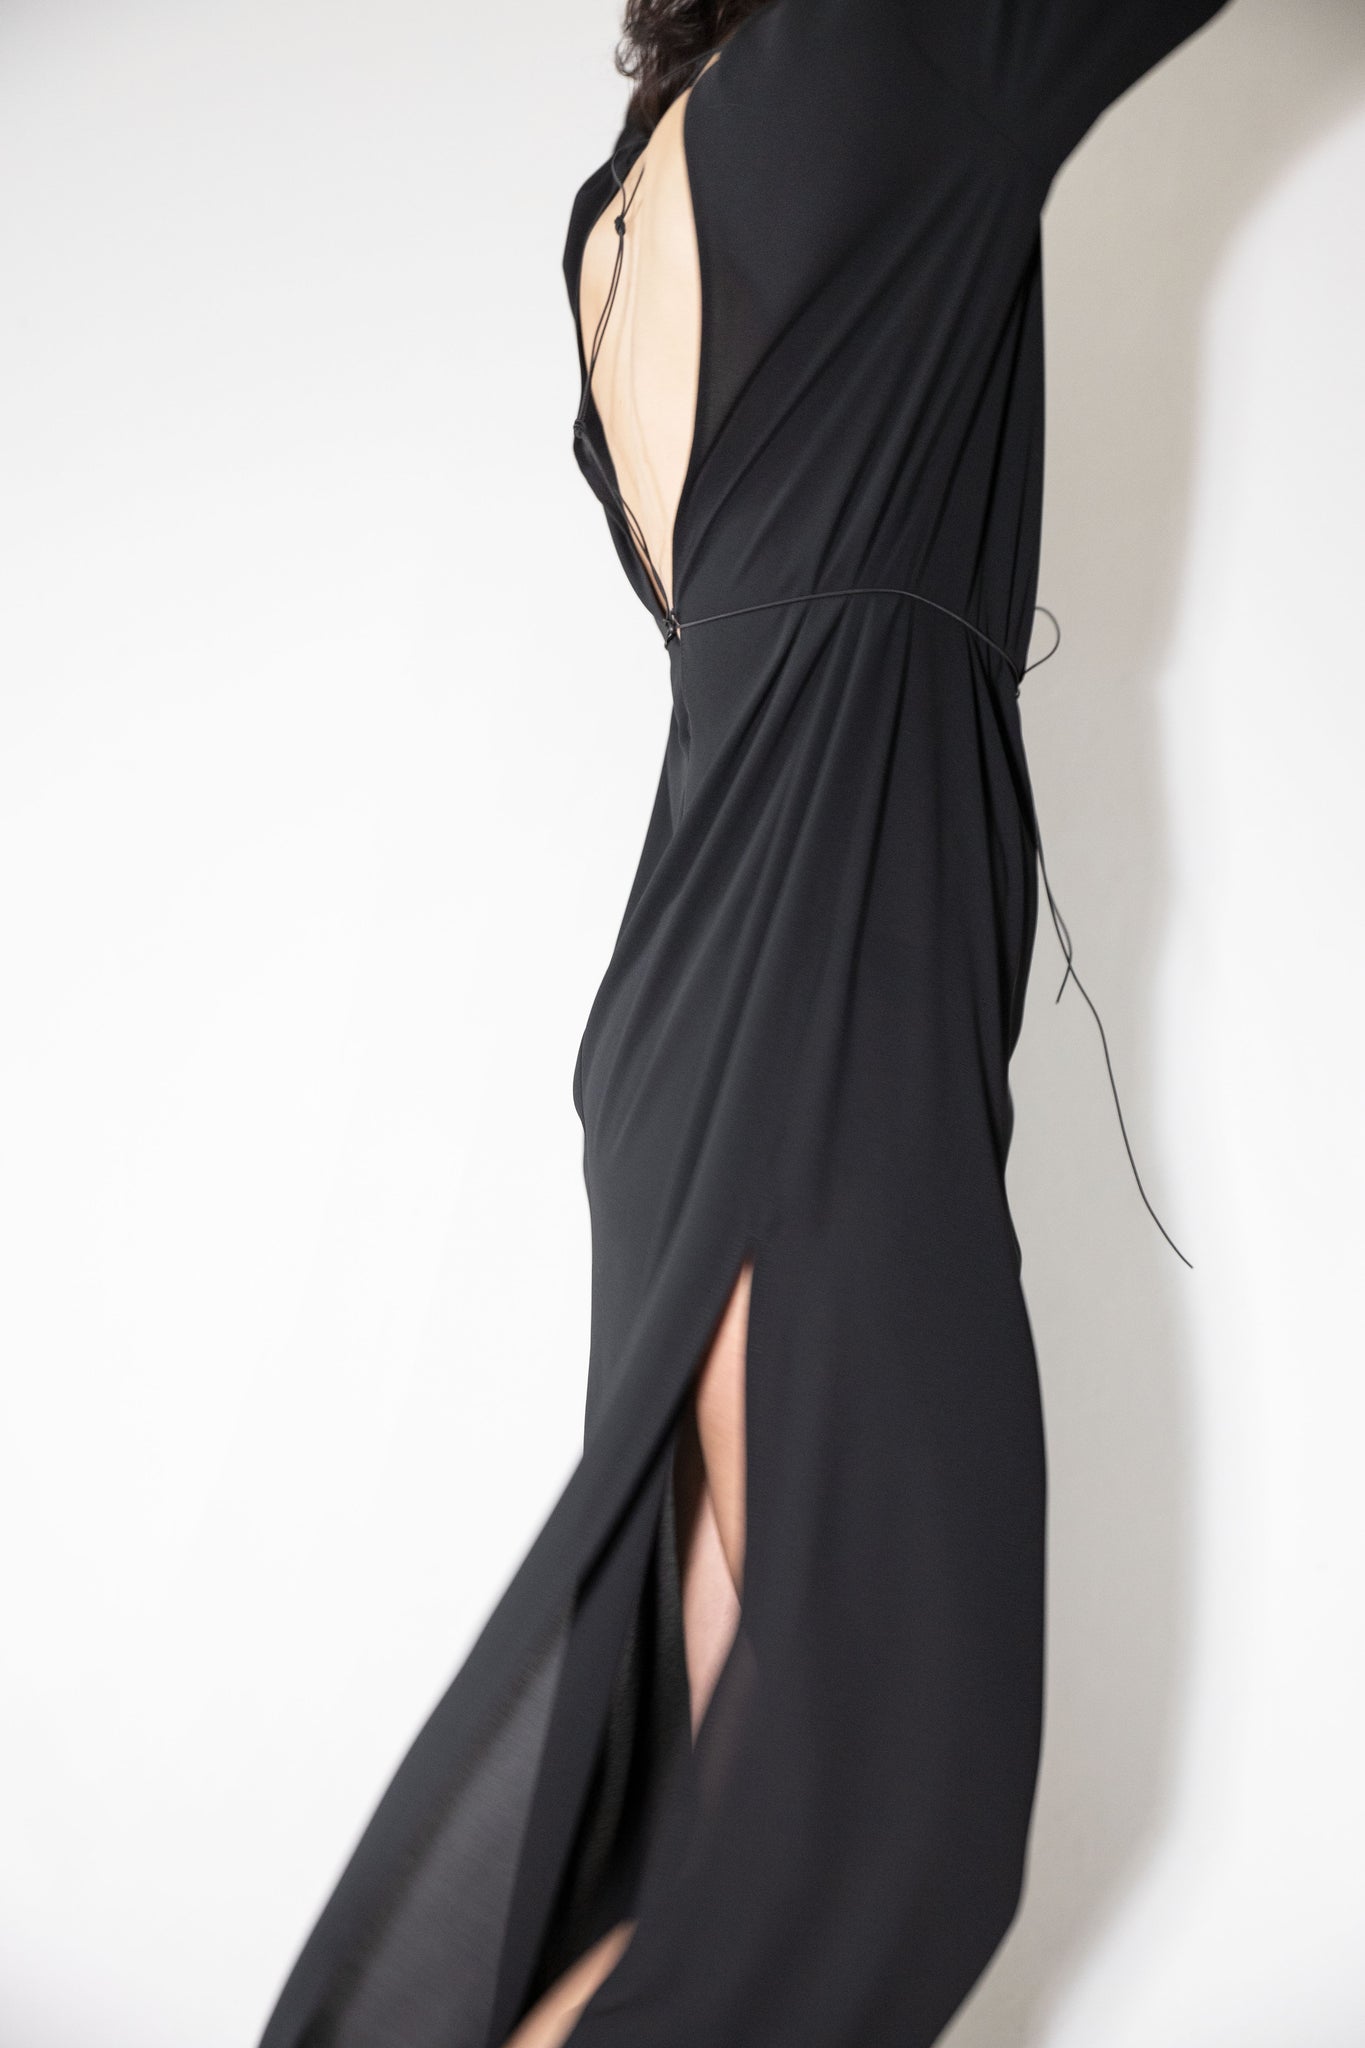 Open back dress with sleeves